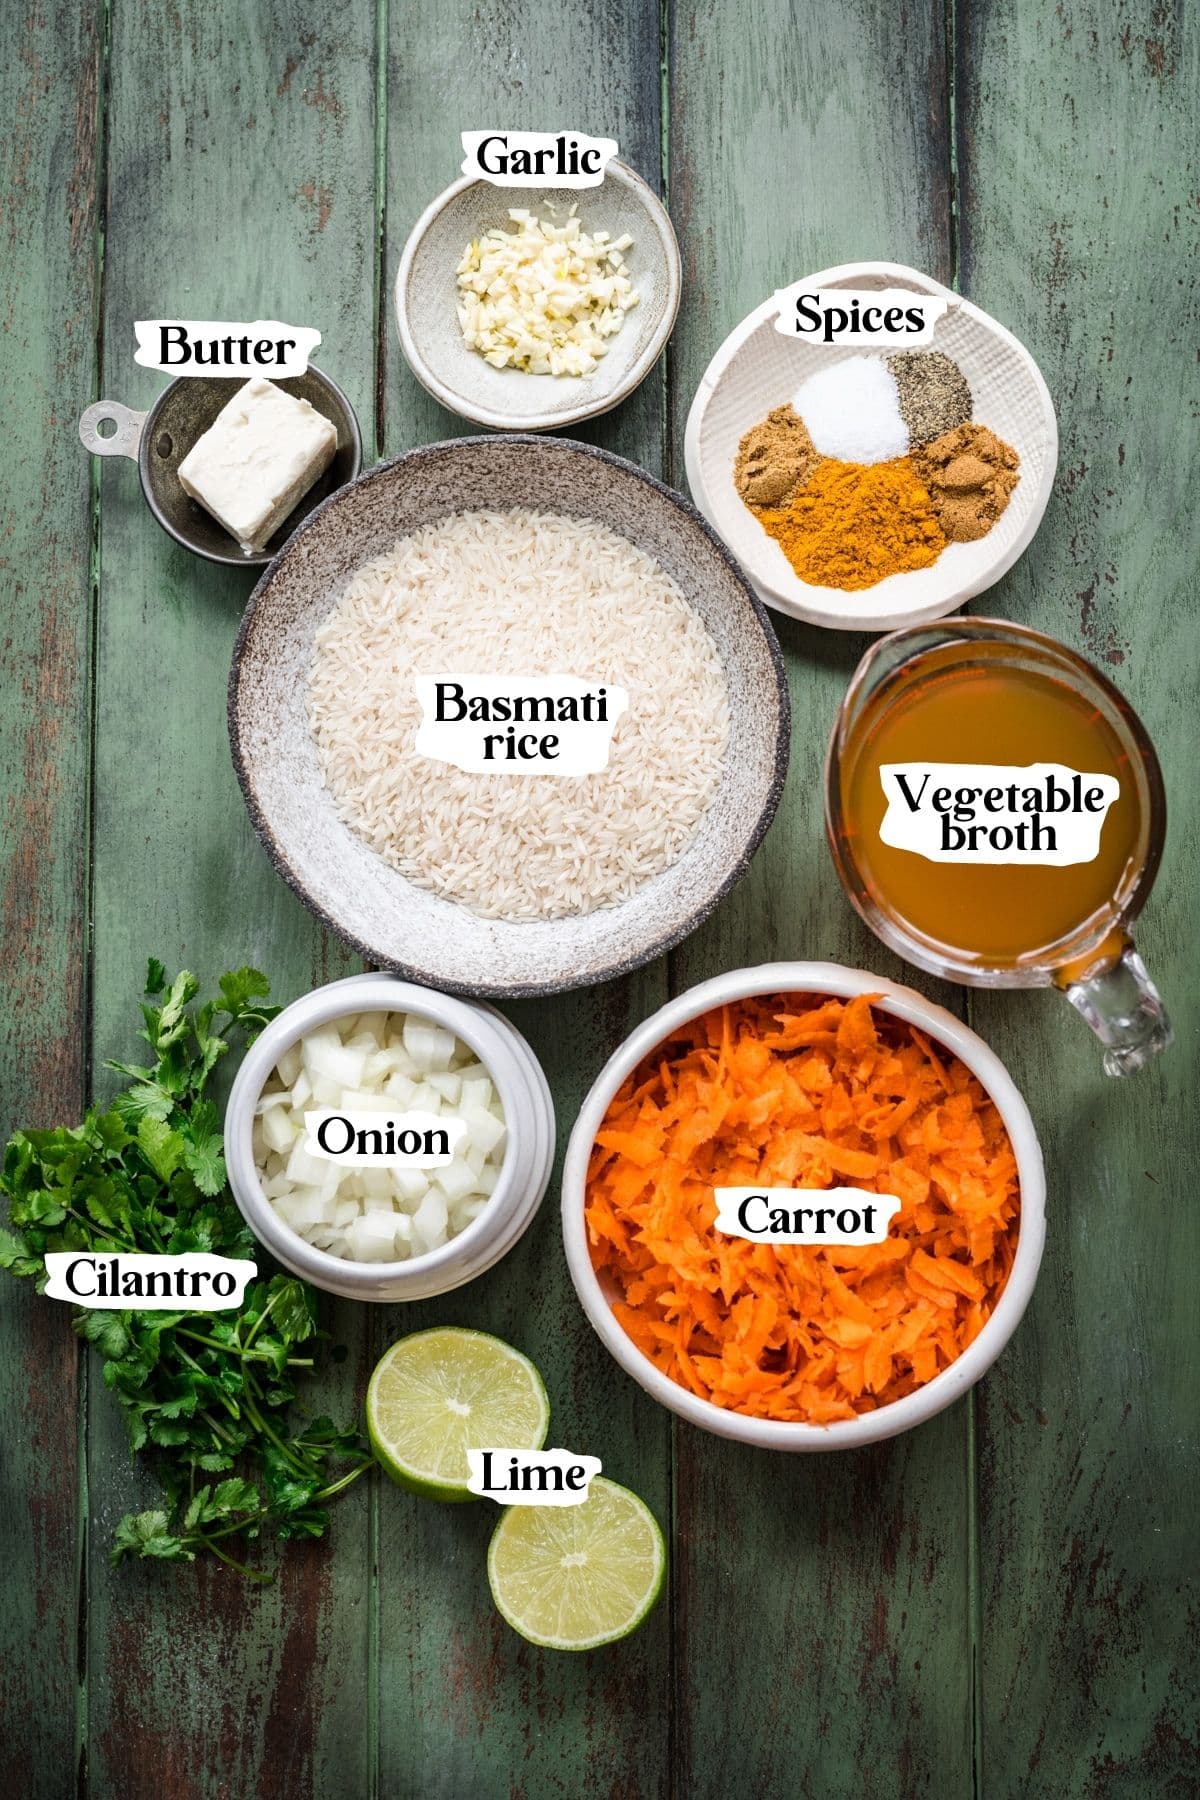 Overhead view of carrot rice ingredients, including spices, basmati rice, and vegetable broth.